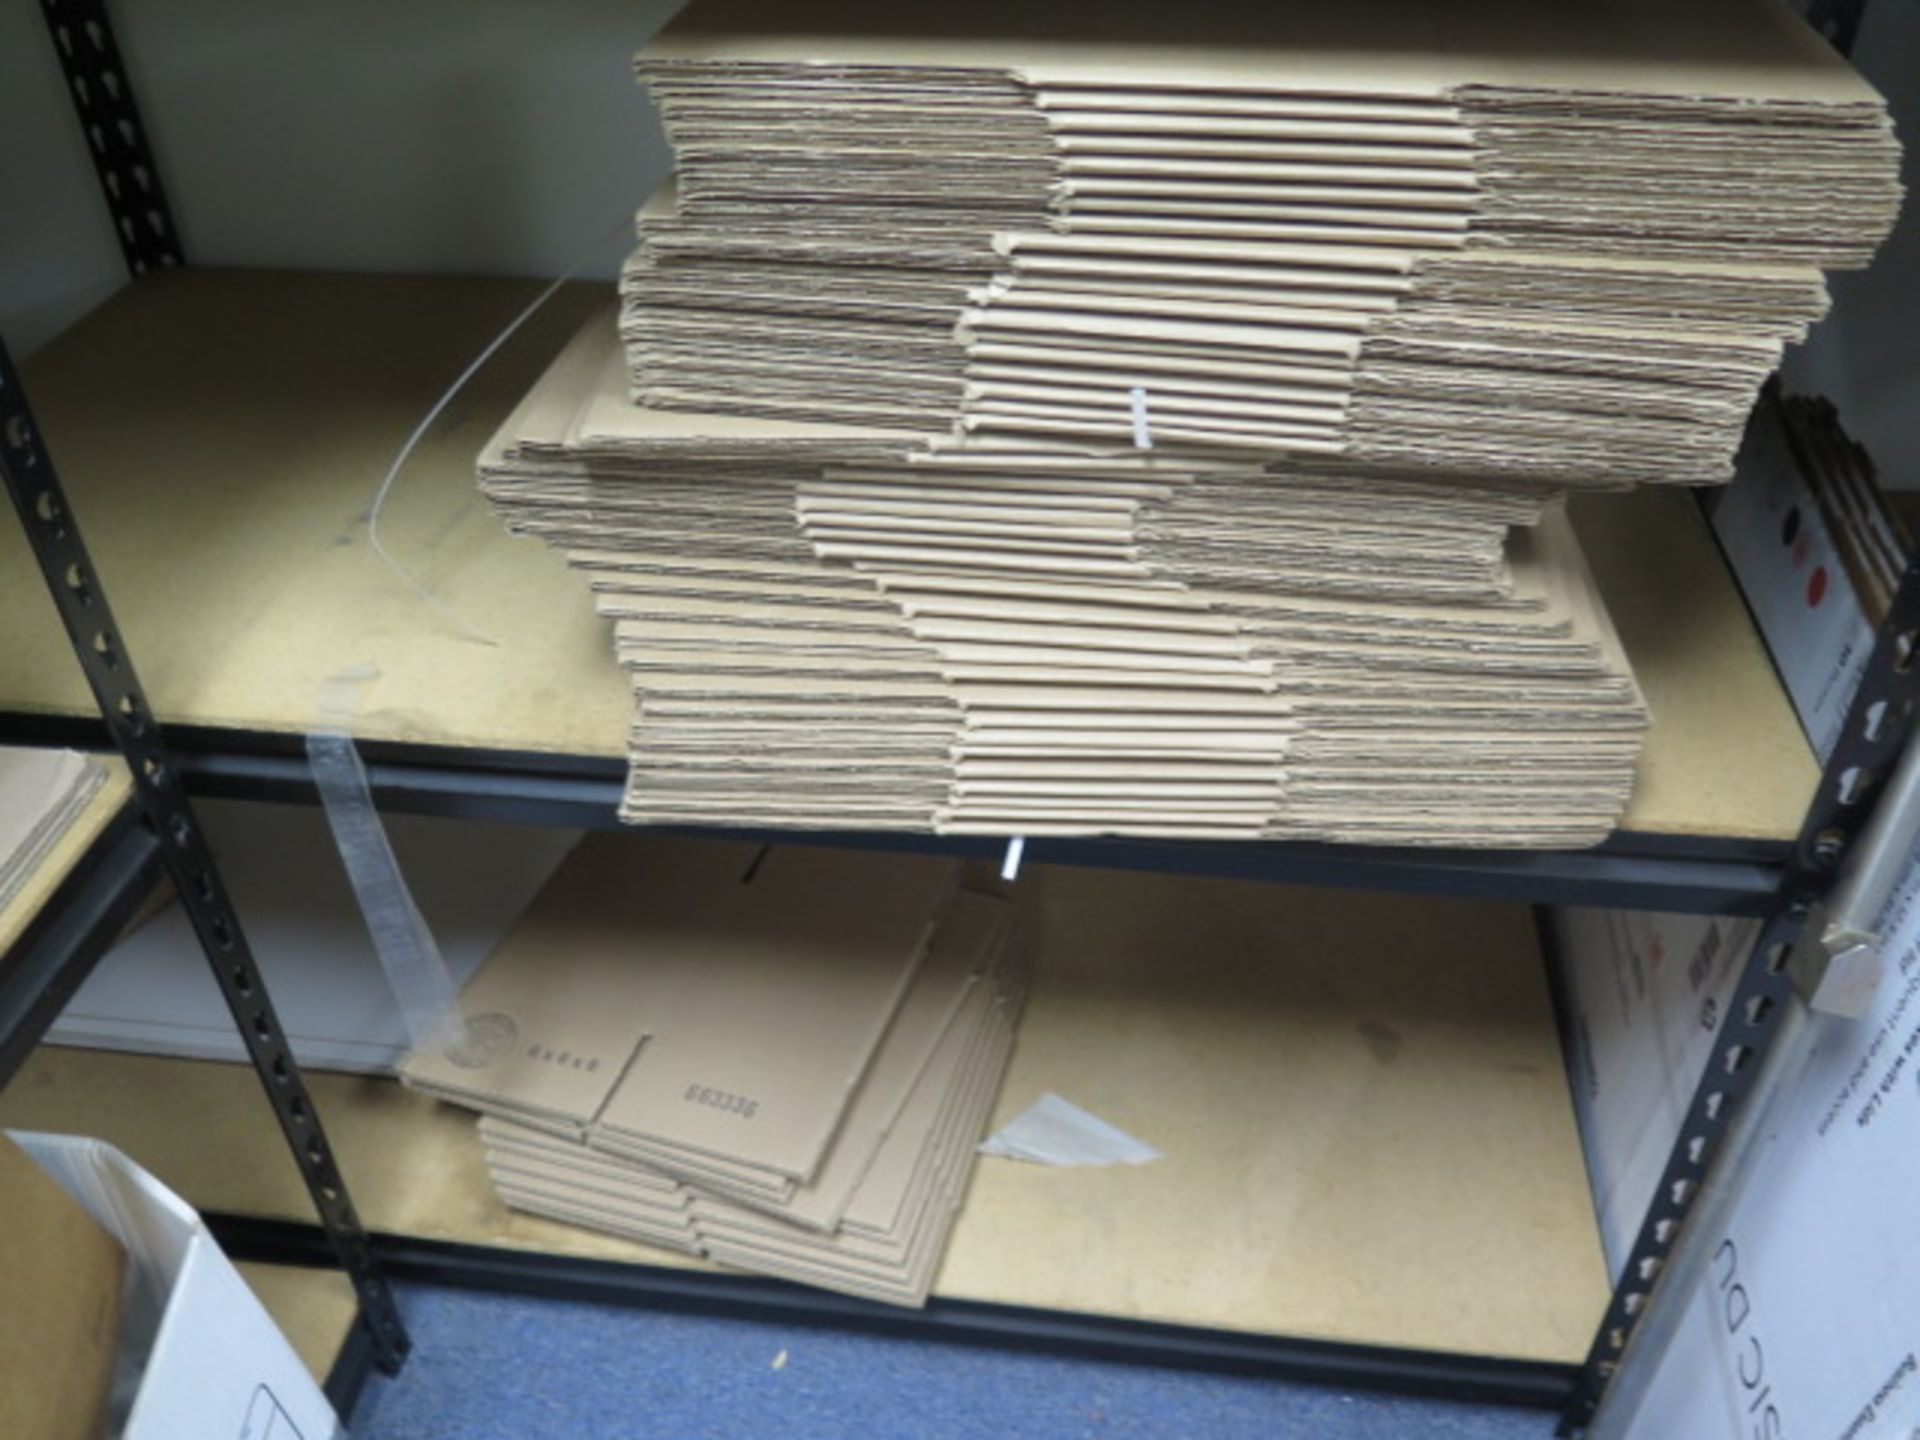 Shipping Boxes, Supplies and Shelves (SOLD AS-IS - NO WARRANTY) - Image 6 of 6